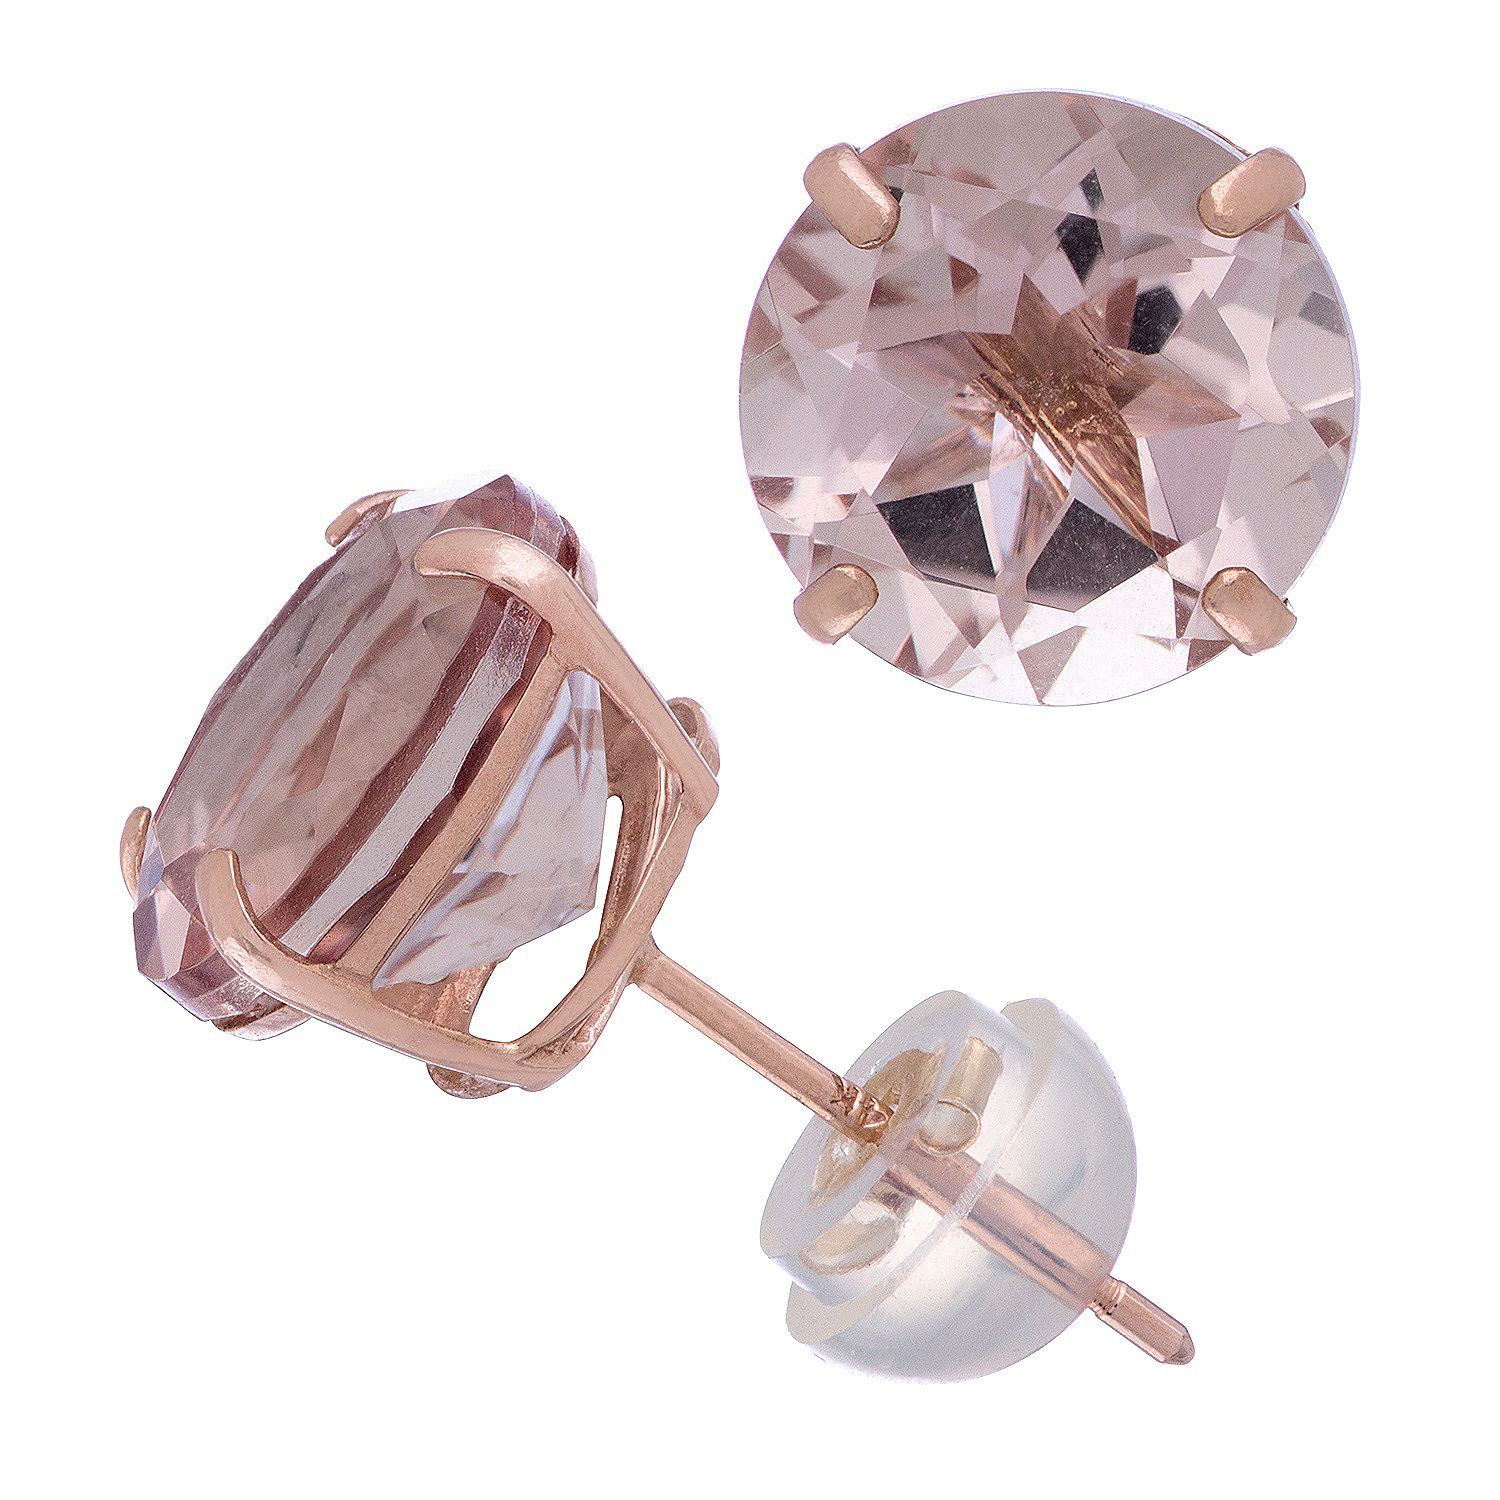 Simulated Pink Morganite 14K Rose Gold 8.1mm Round Stud Earrings - JCPenney